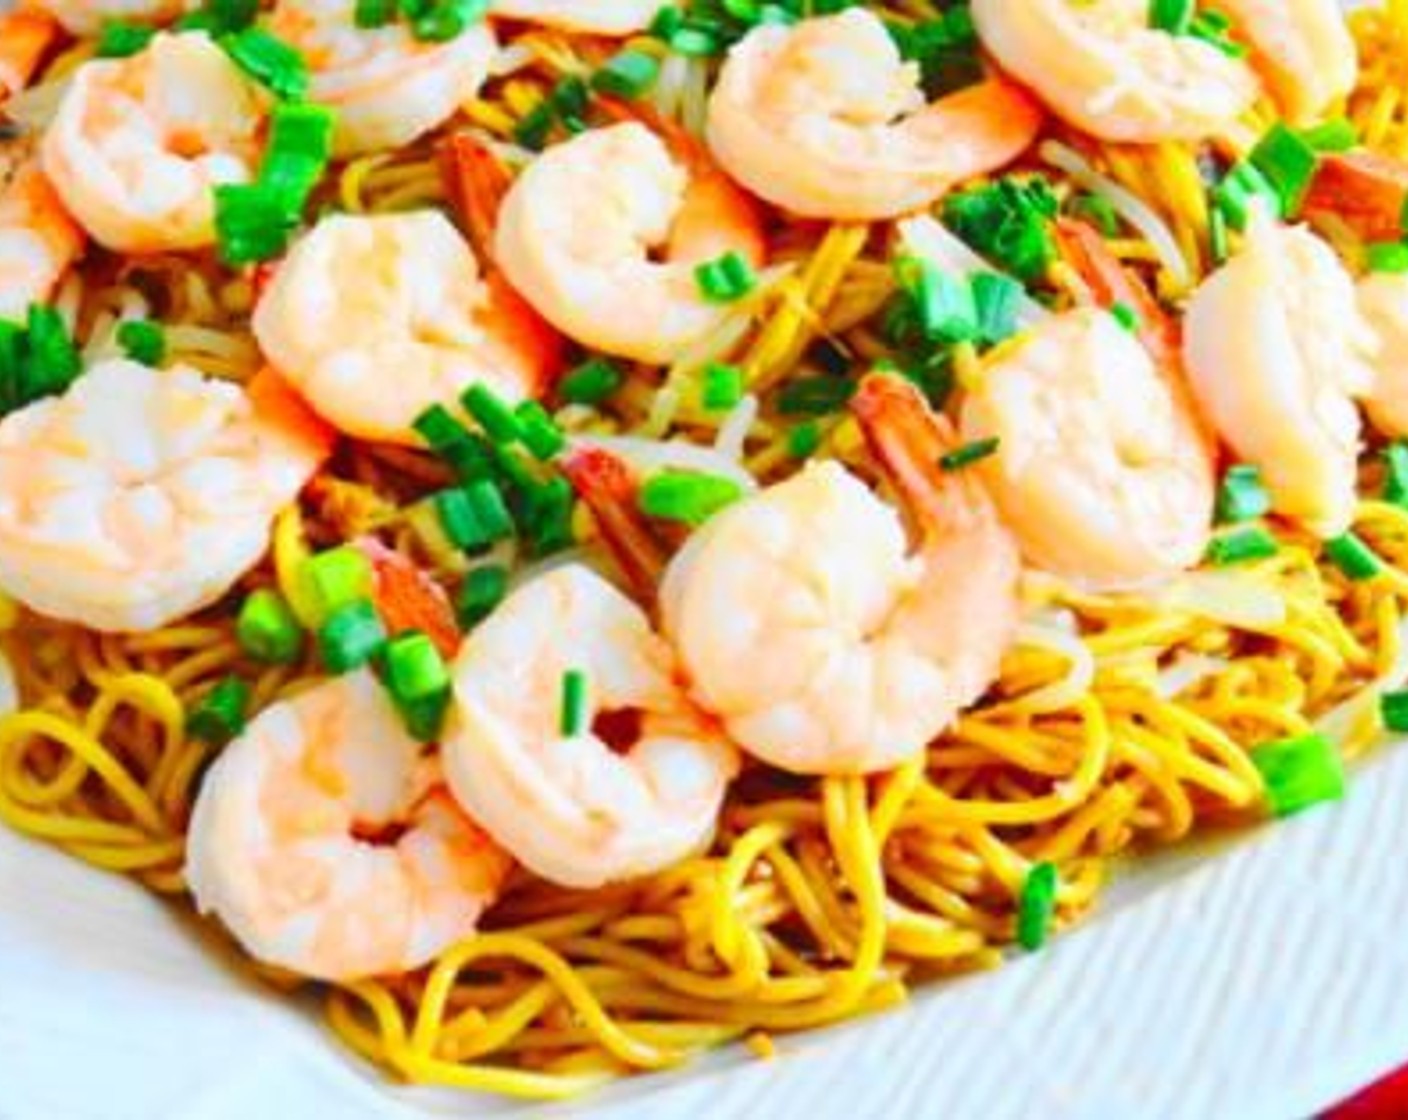 step 6 Arrange the noodles on a large platter, then arrange the shrimp on top of it. Sprinkle the bean sprouts and Scallion (1 bunch) on top for garnish and serve family style immediately!